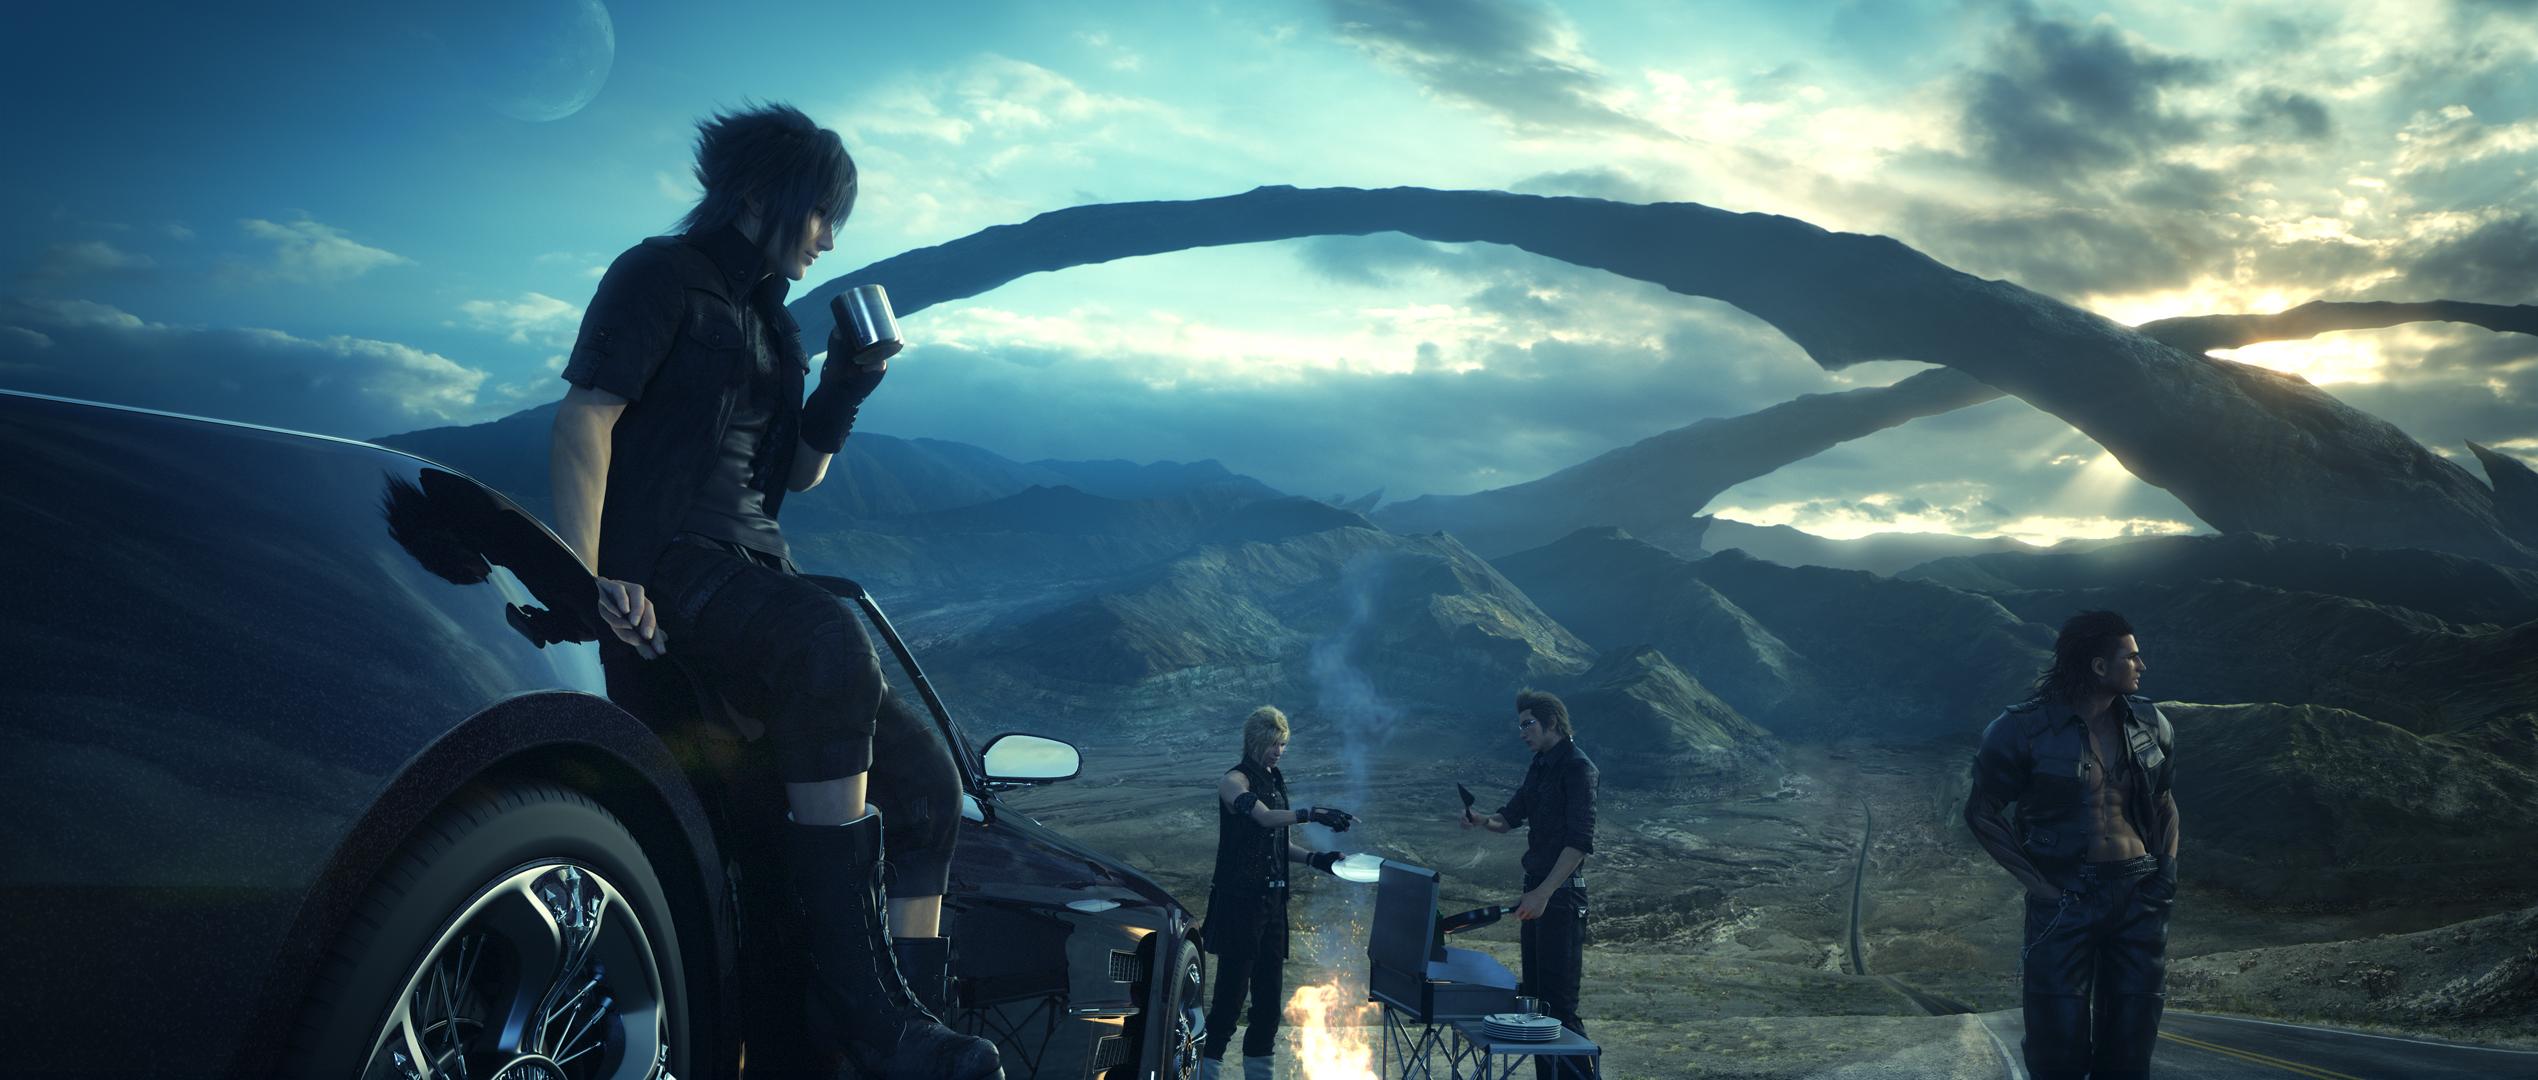 2538 x 1080 · jpeg - 117 Final Fantasy XV HD Wallpapers | Background Images - Wallpaper Abyss